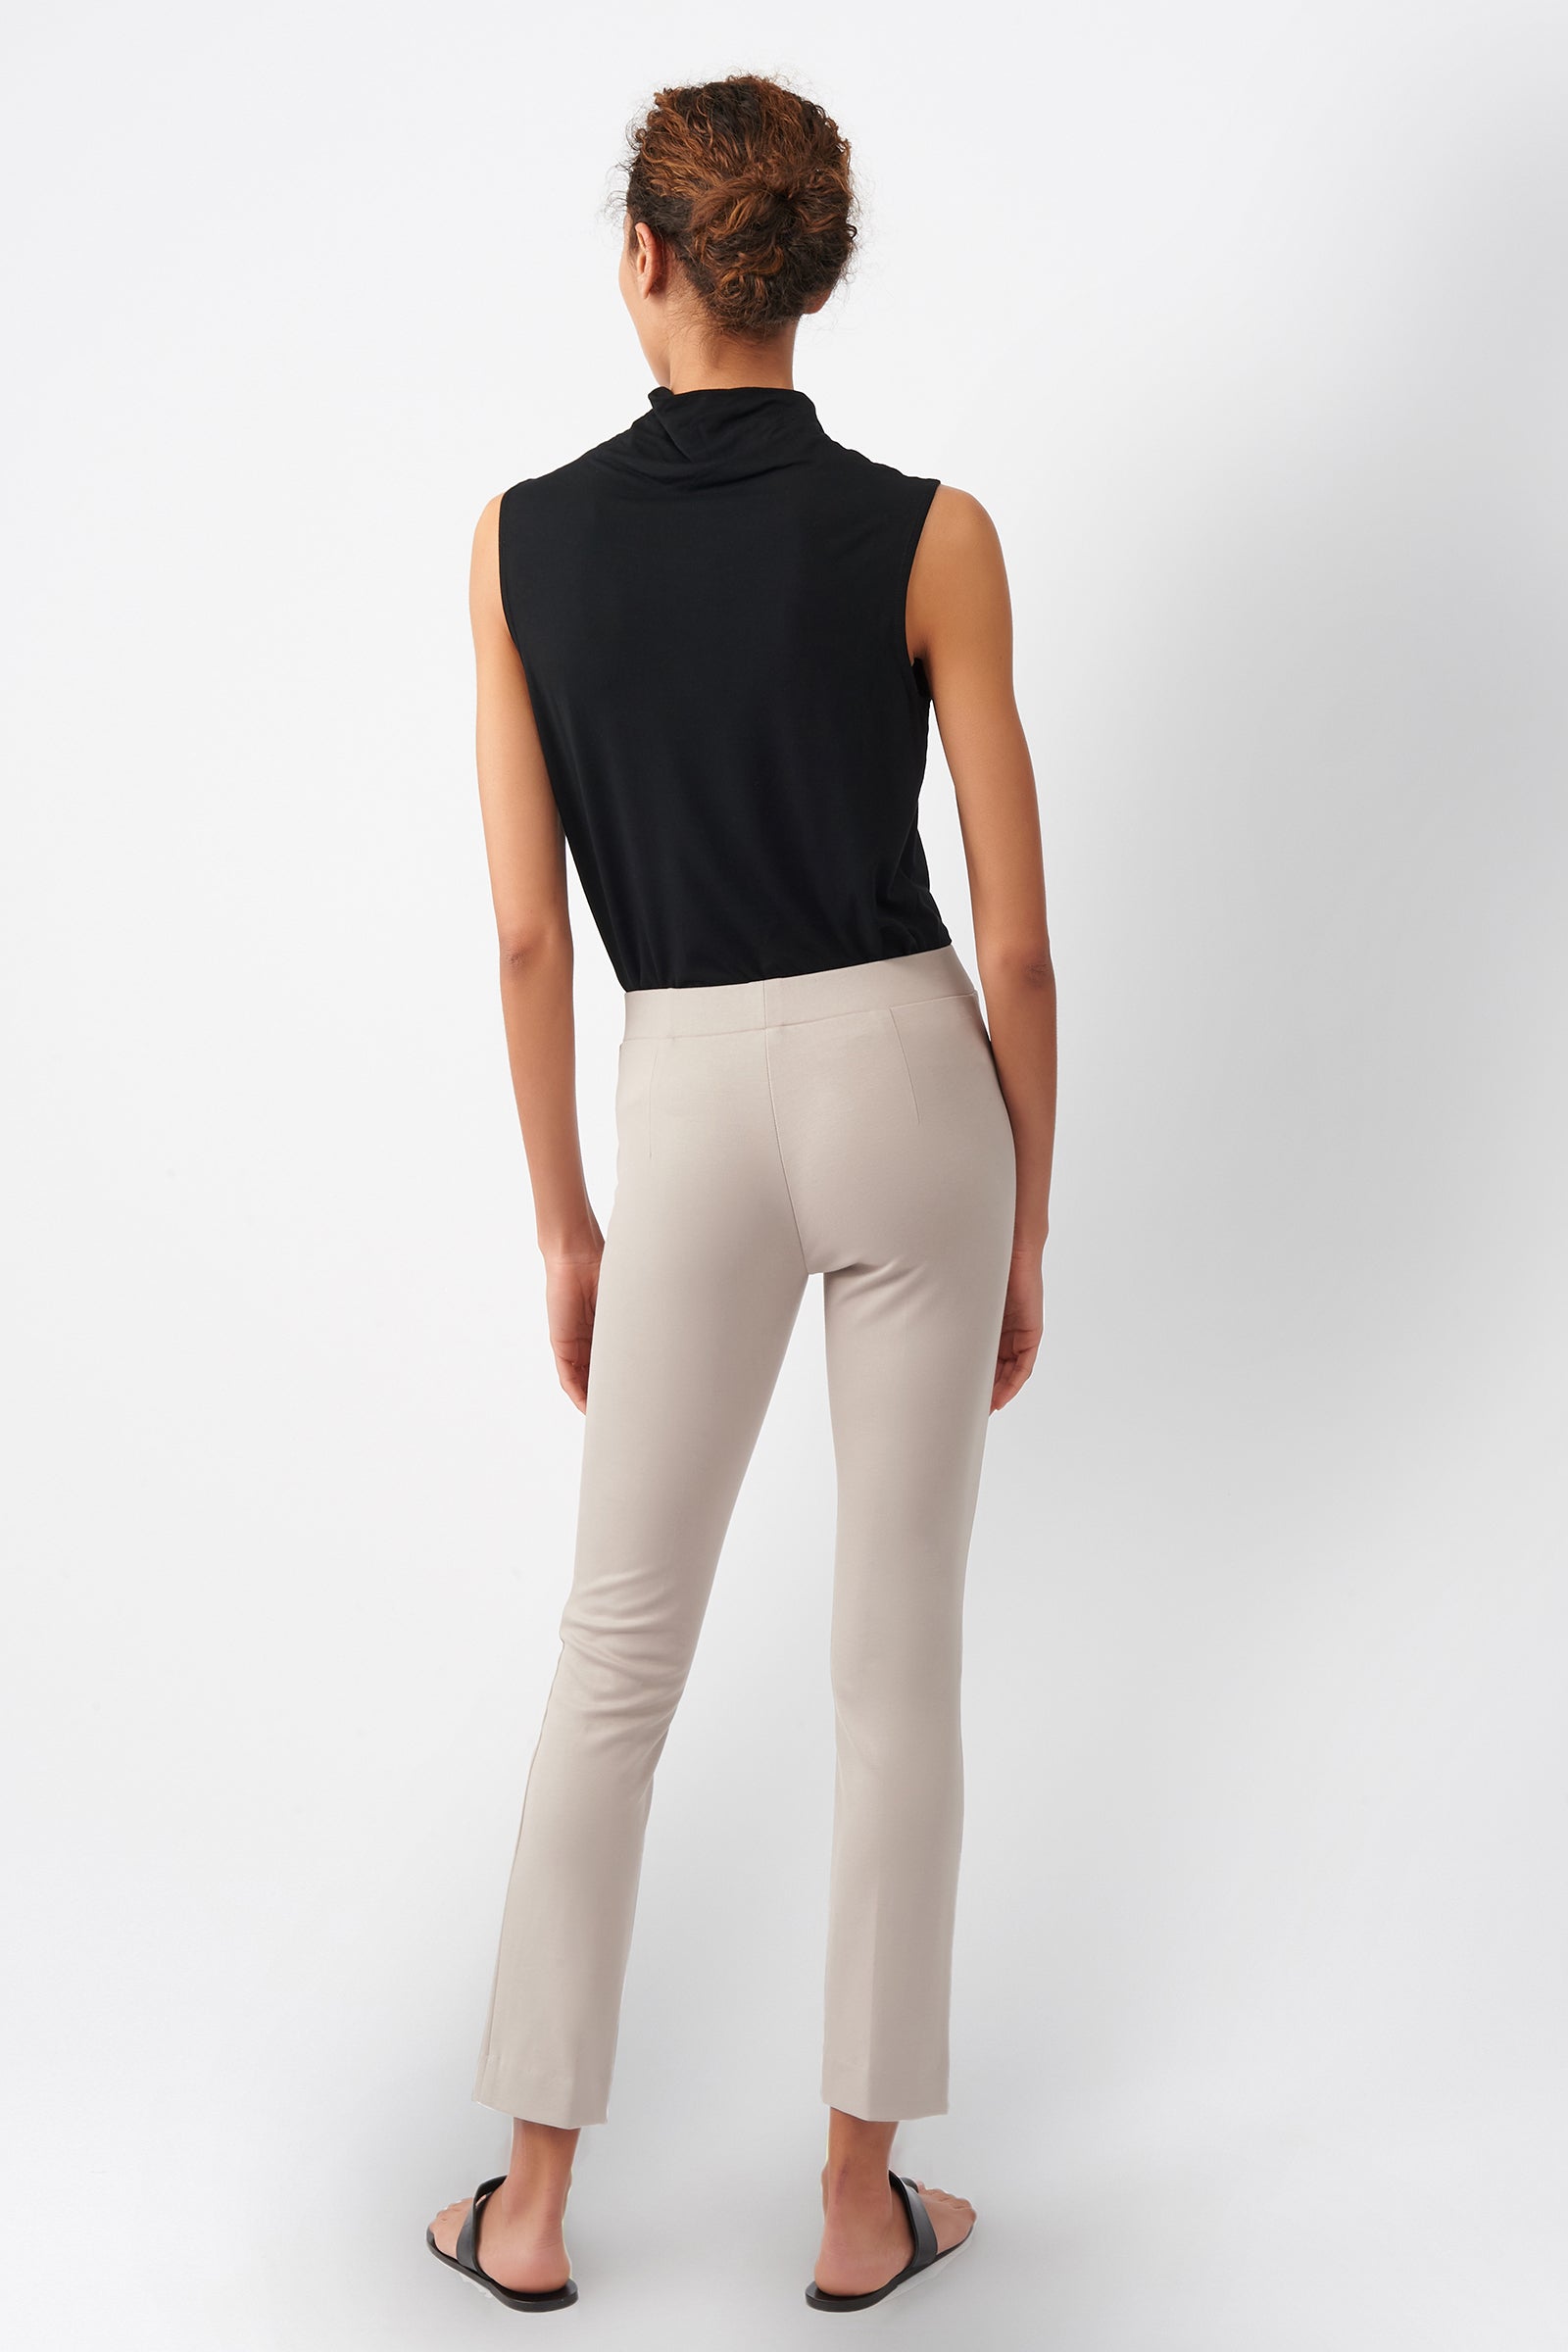 Kal Rieman Pintuck Ponte Ankle Pant in Taupe on Model Front View